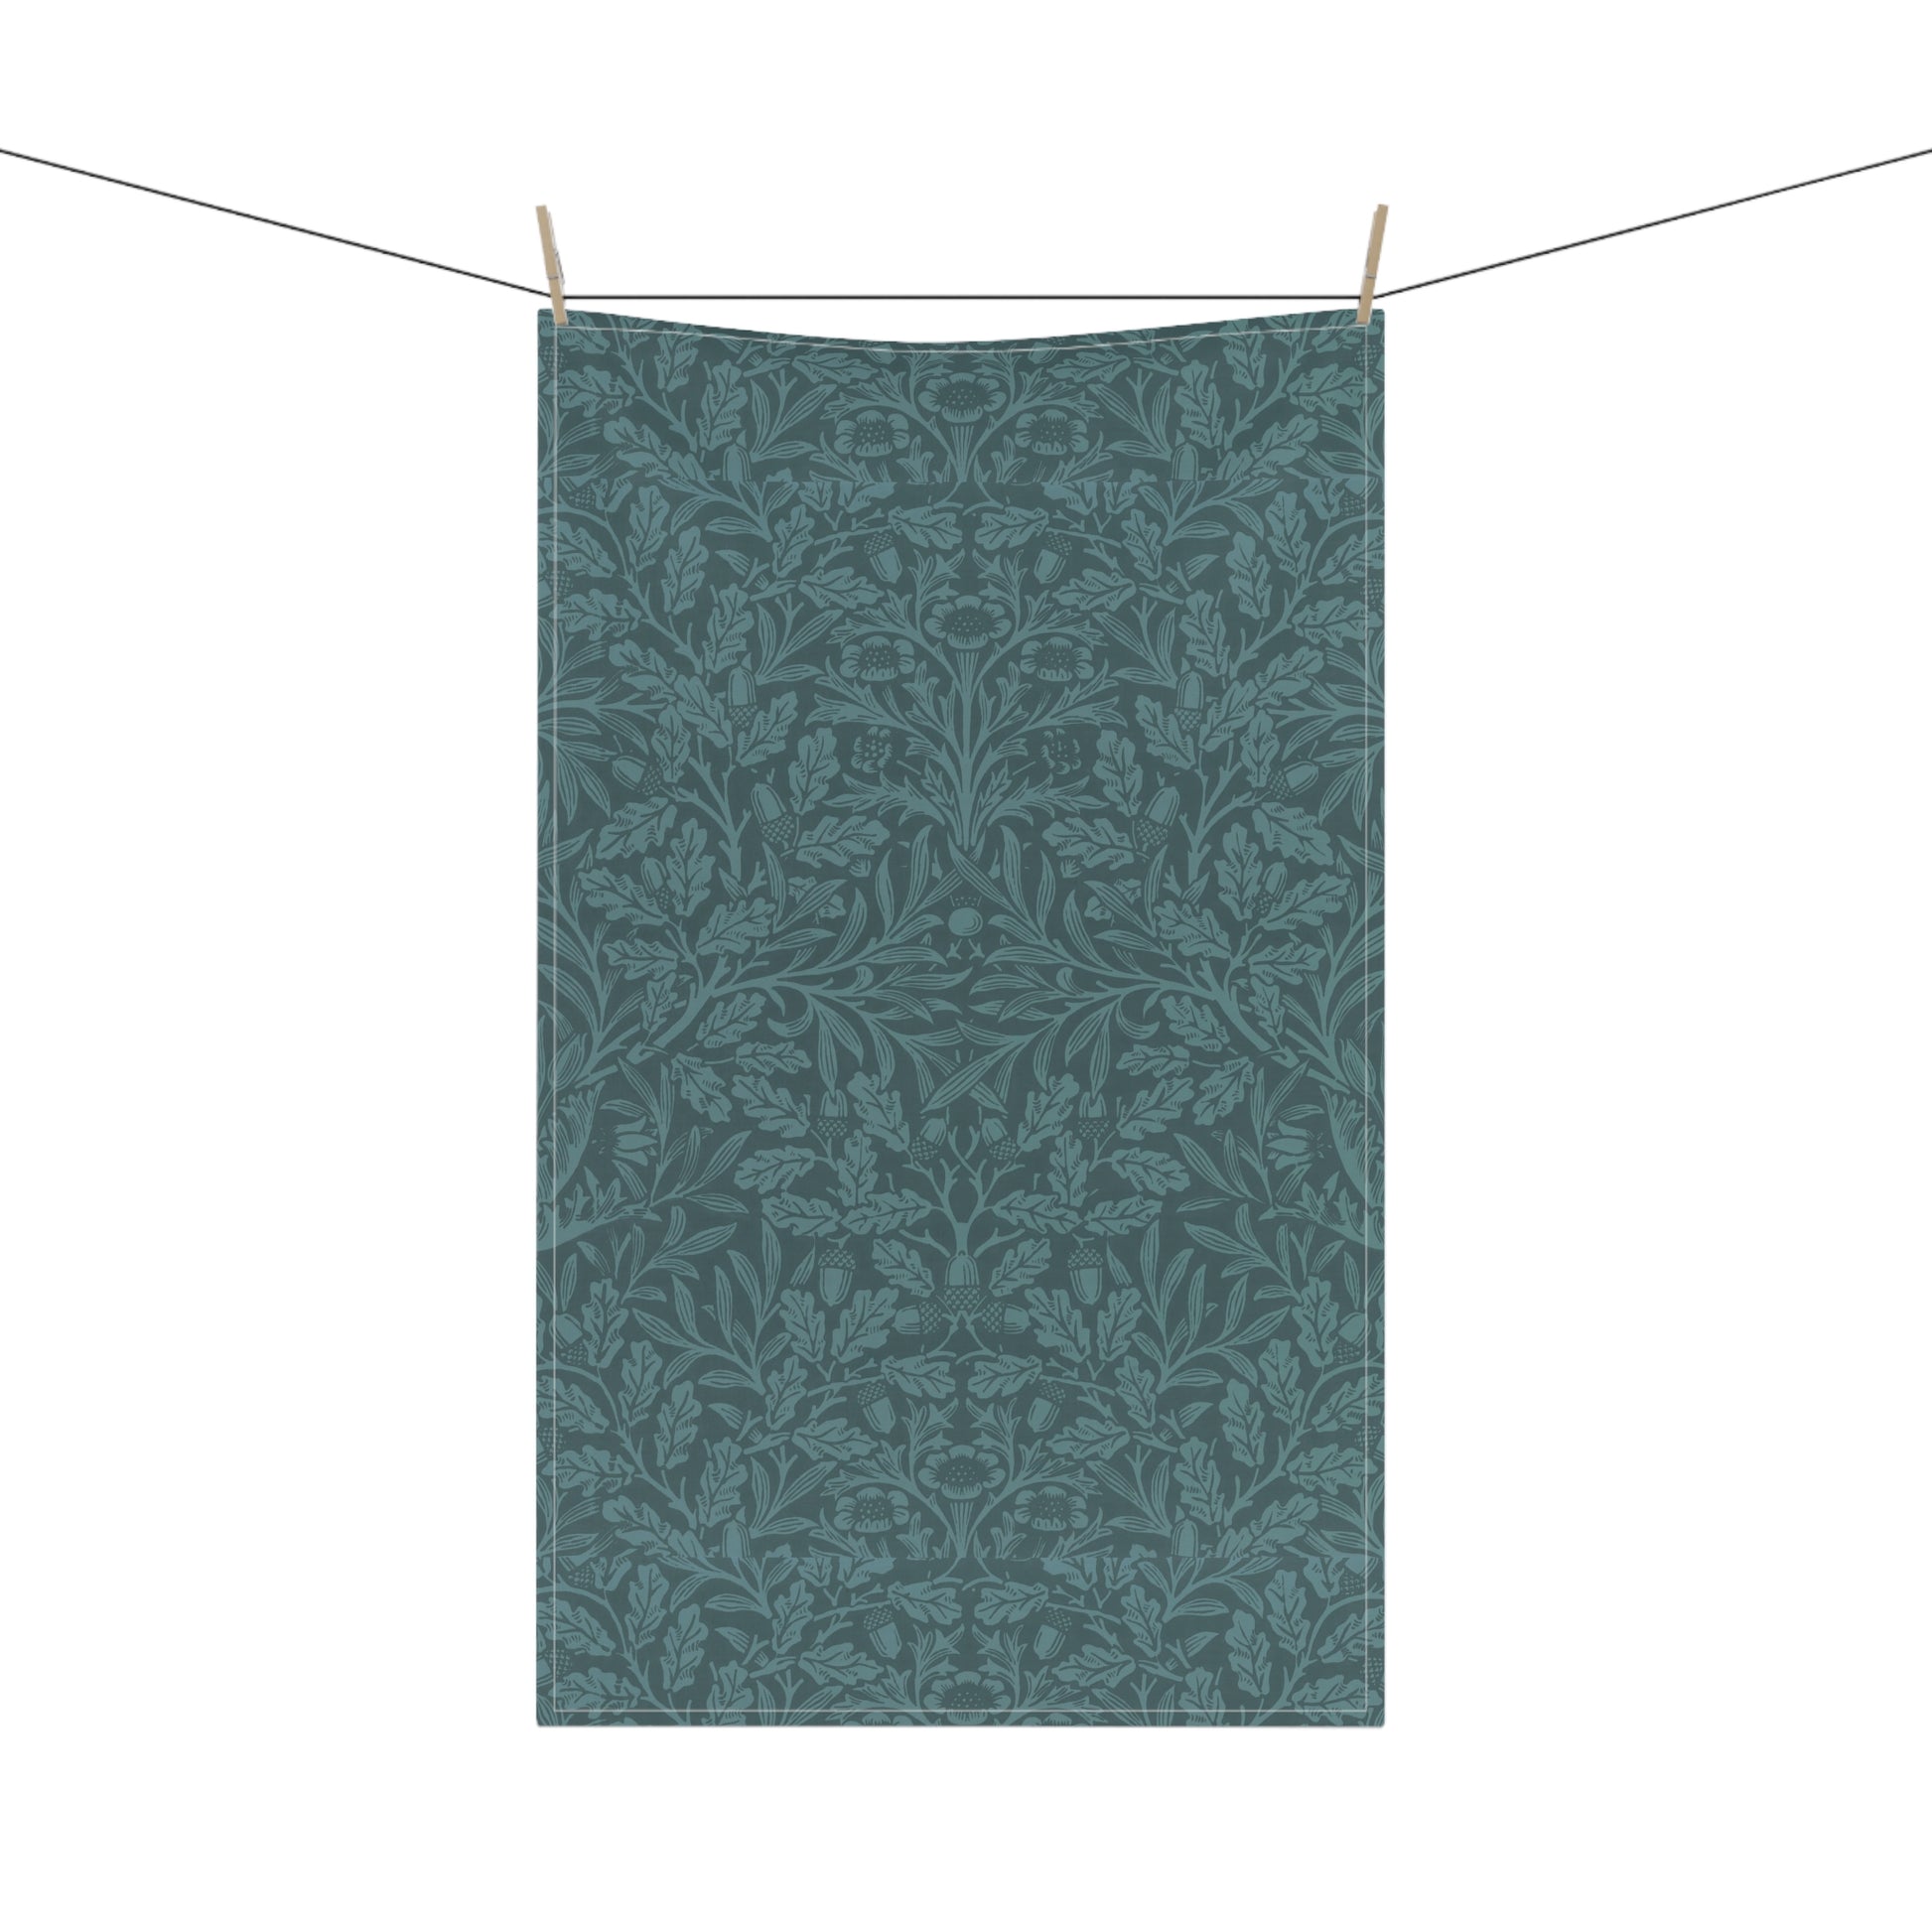 william-morris-co-kitchen-tea-towel-acorn-and-oak-leaves-collection-teal-11